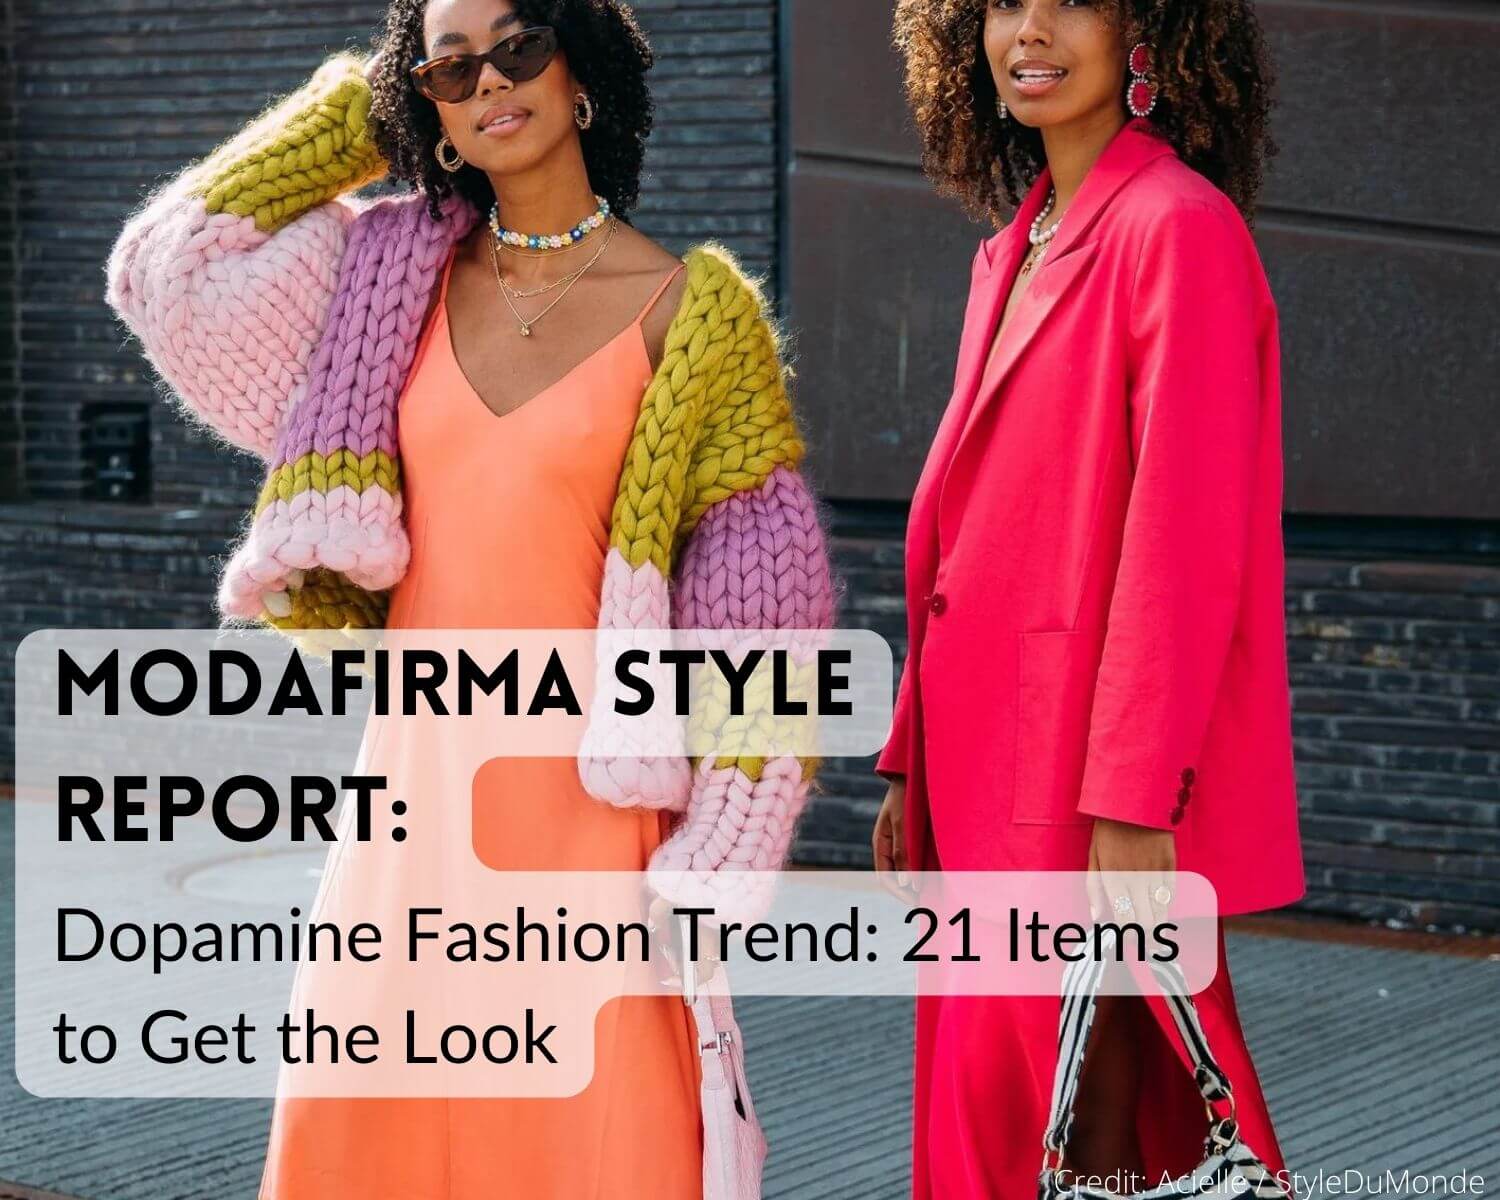 Dopamine Fashion Trend: 21 Items to Get the Look